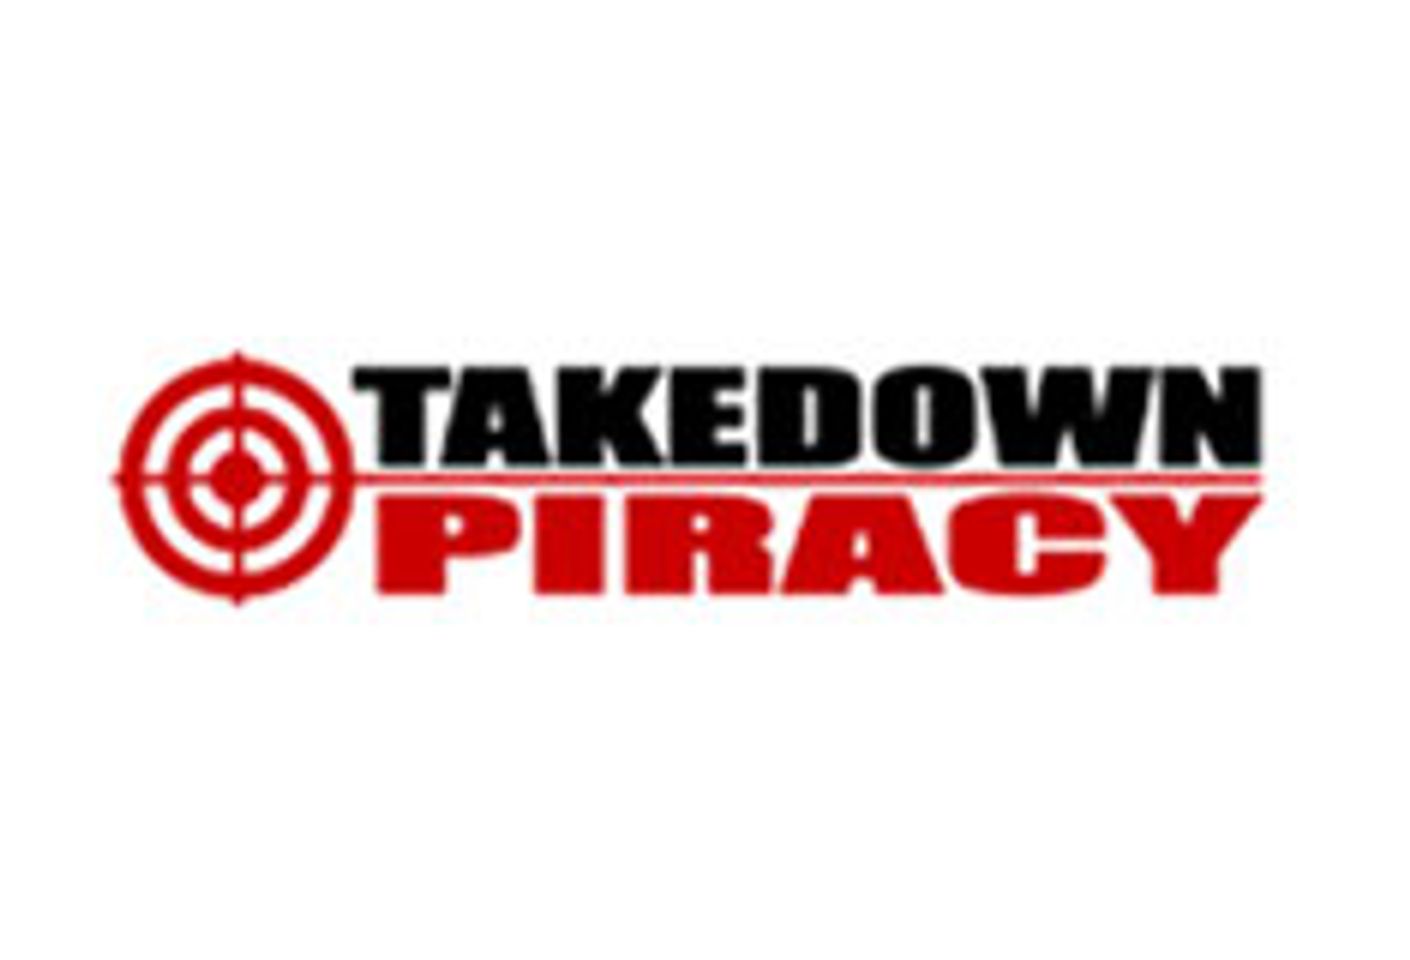 Takedown Piracy Featured as Supporter of The Artists’ Bill of Rights Campaign